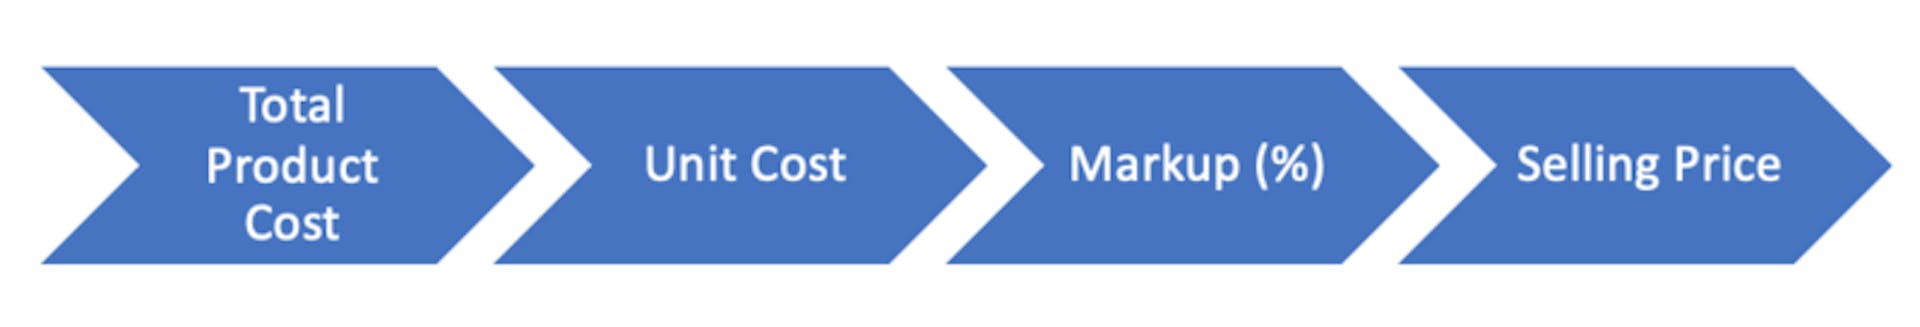 Cost-Plus Pricing Model